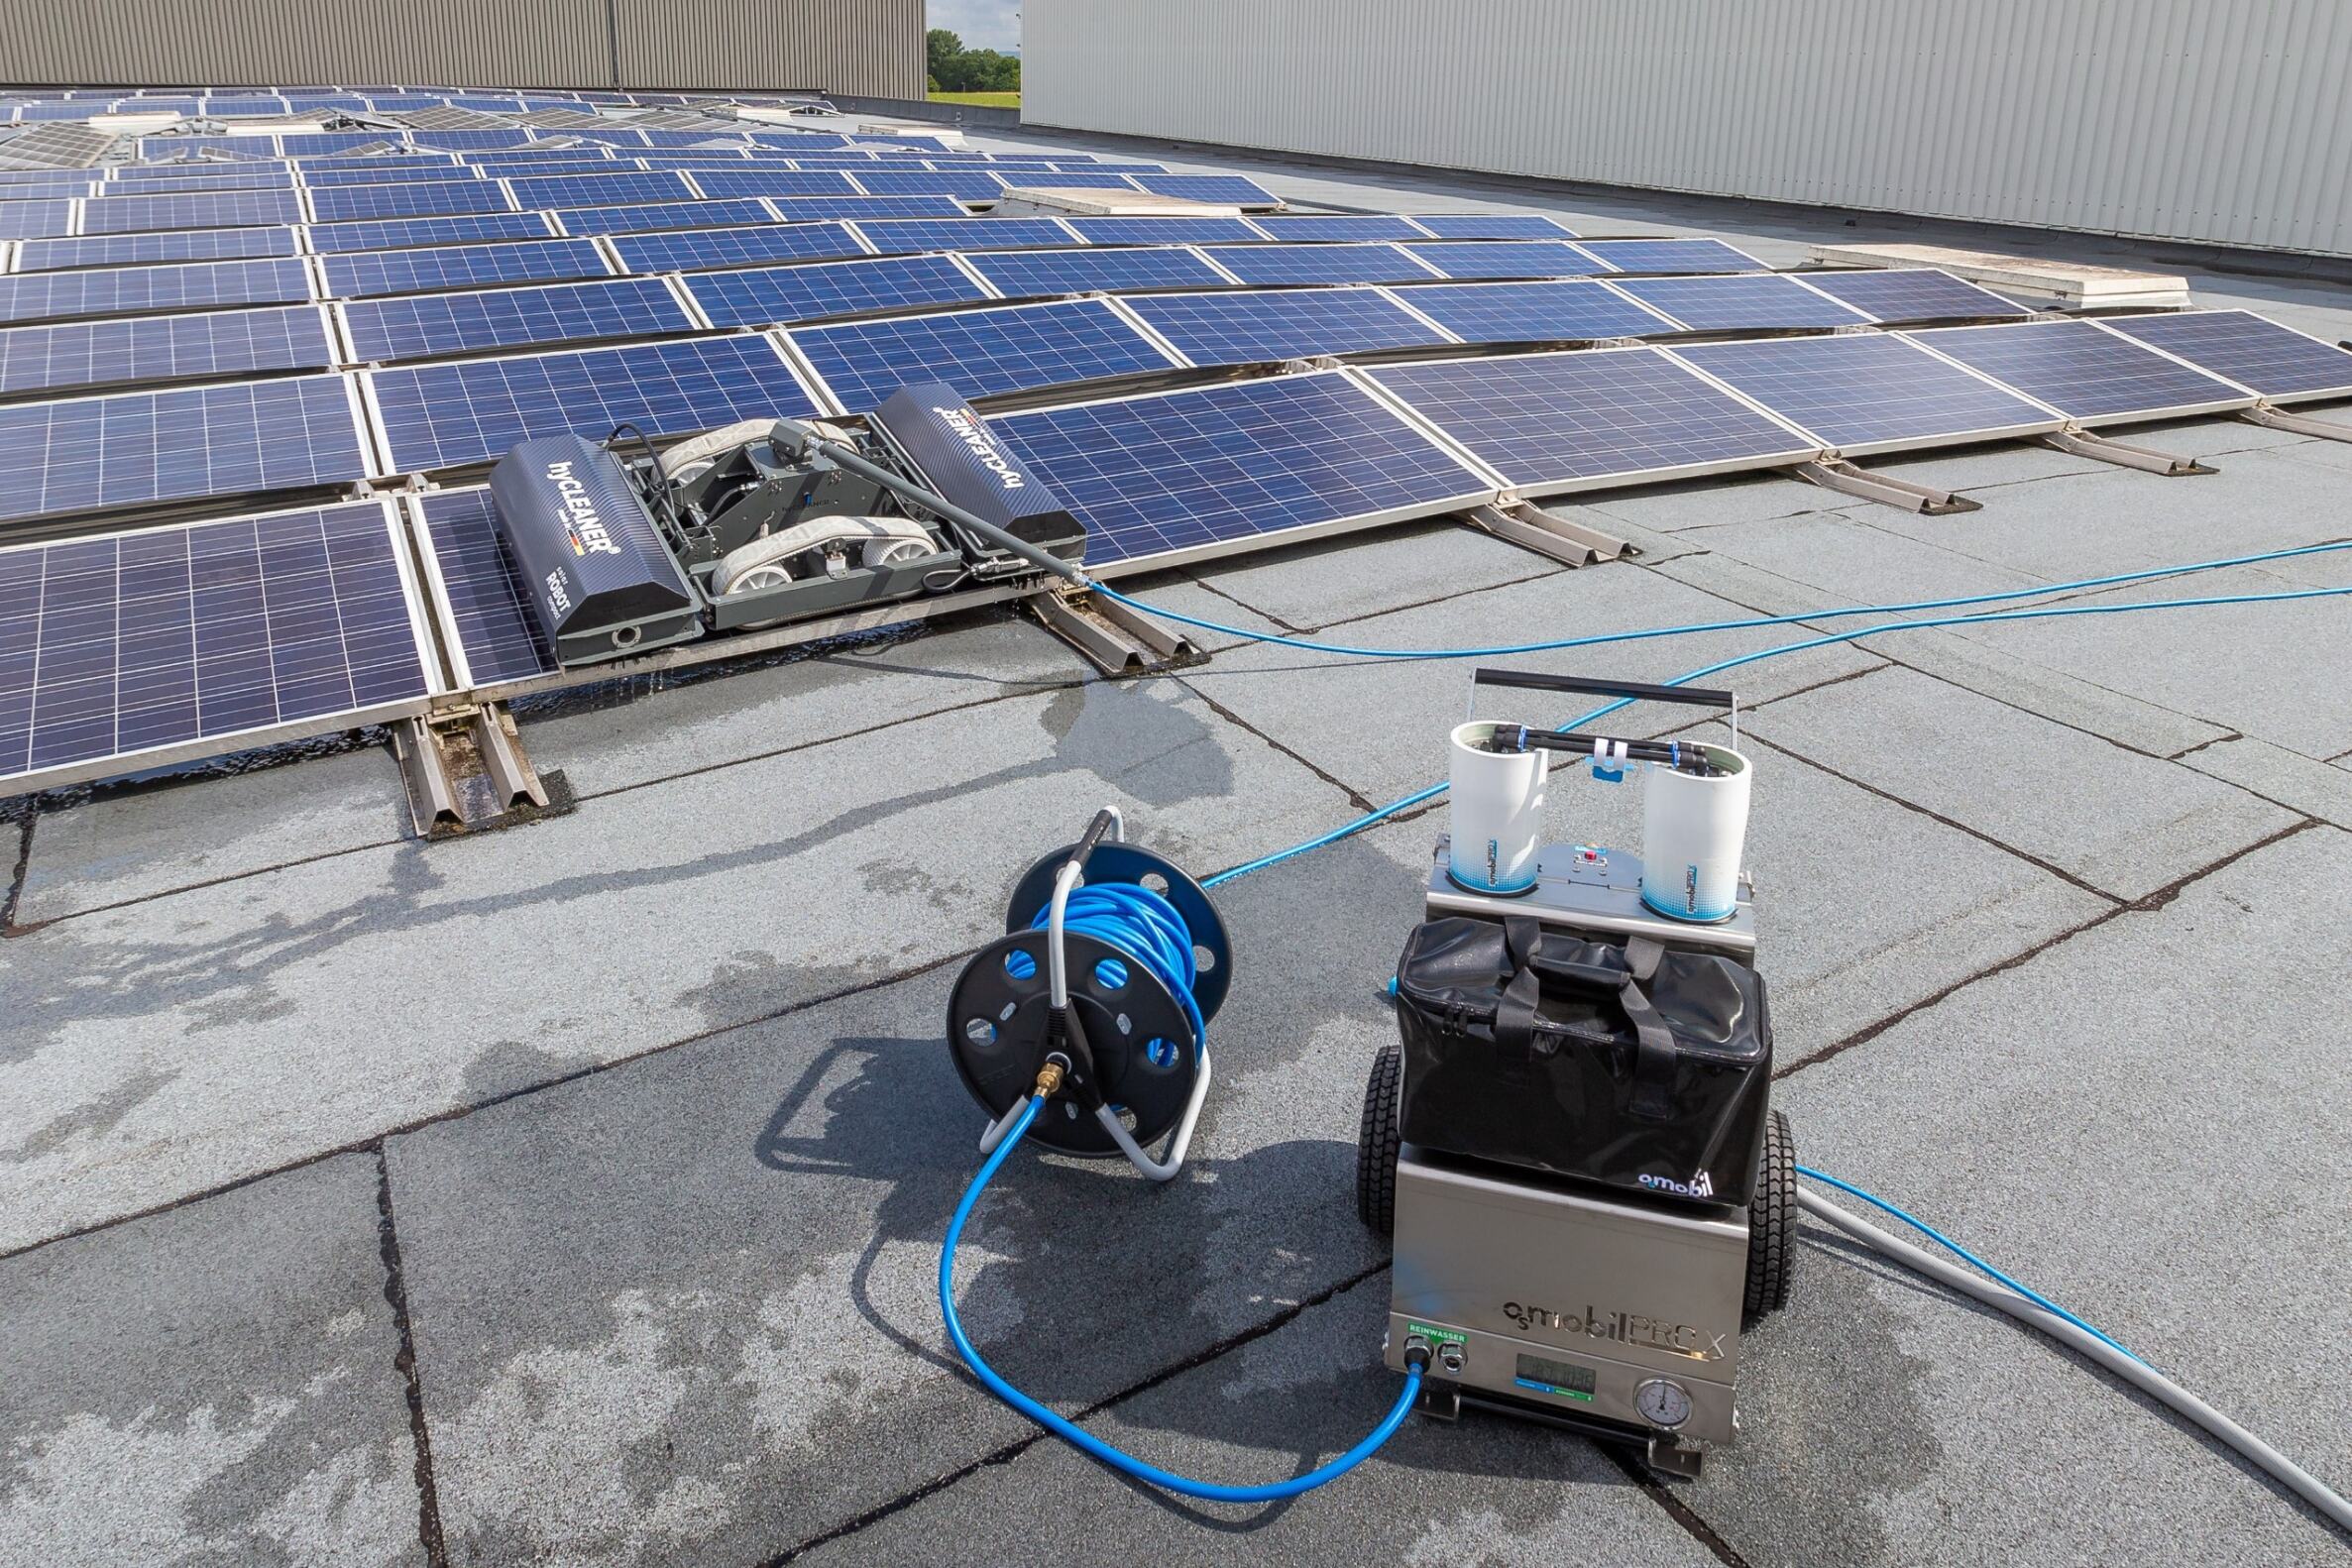 Osmosis deep clean: A cleaning robot cleans solar panels and is supplied with osmosis water by an osmosis system.